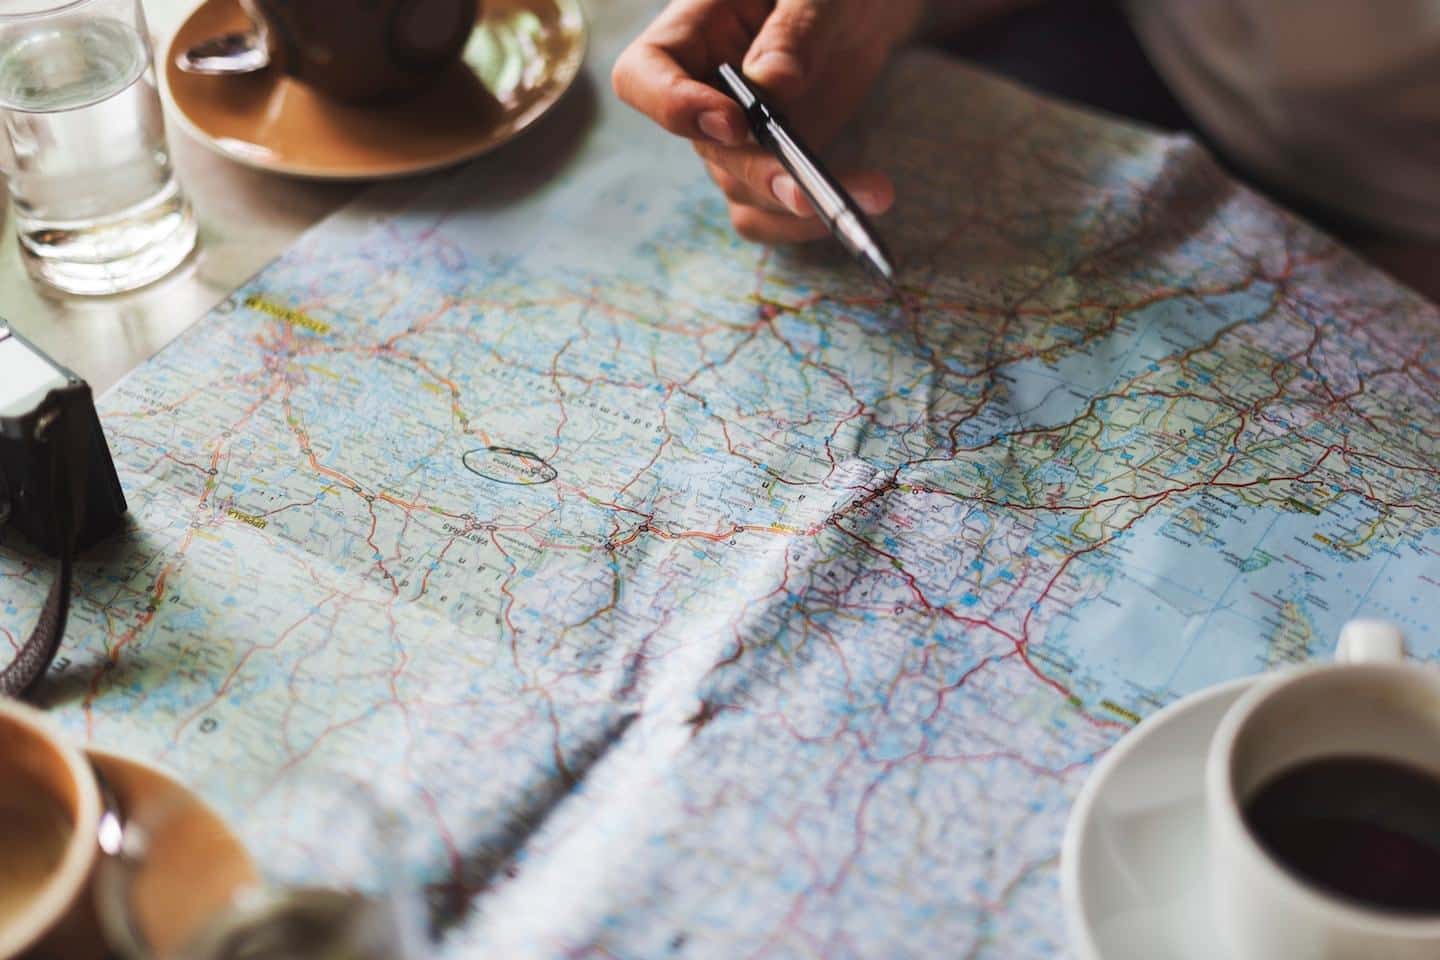 a person holding a pen over a map with coffee